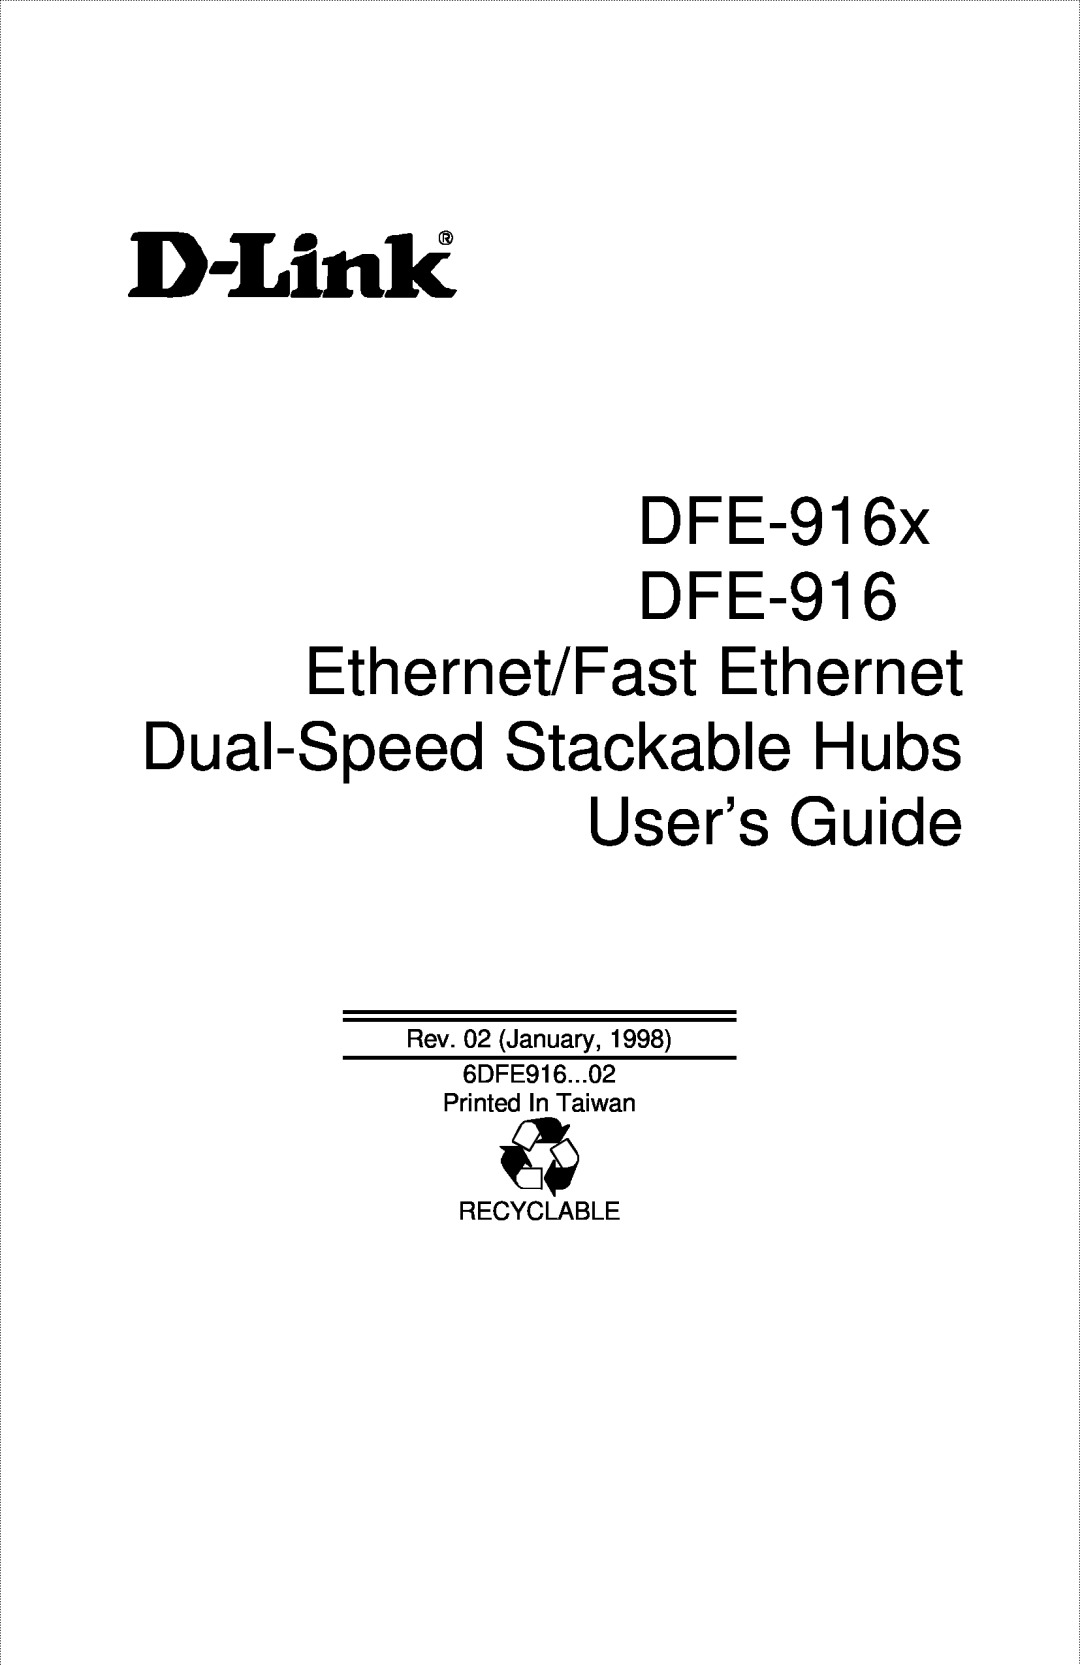 D-Link DFE-916X manual DFE-916x DFE-916 Ethernet/Fast Ethernet Dual-Speed Stackable Hubs, User’s Guide 